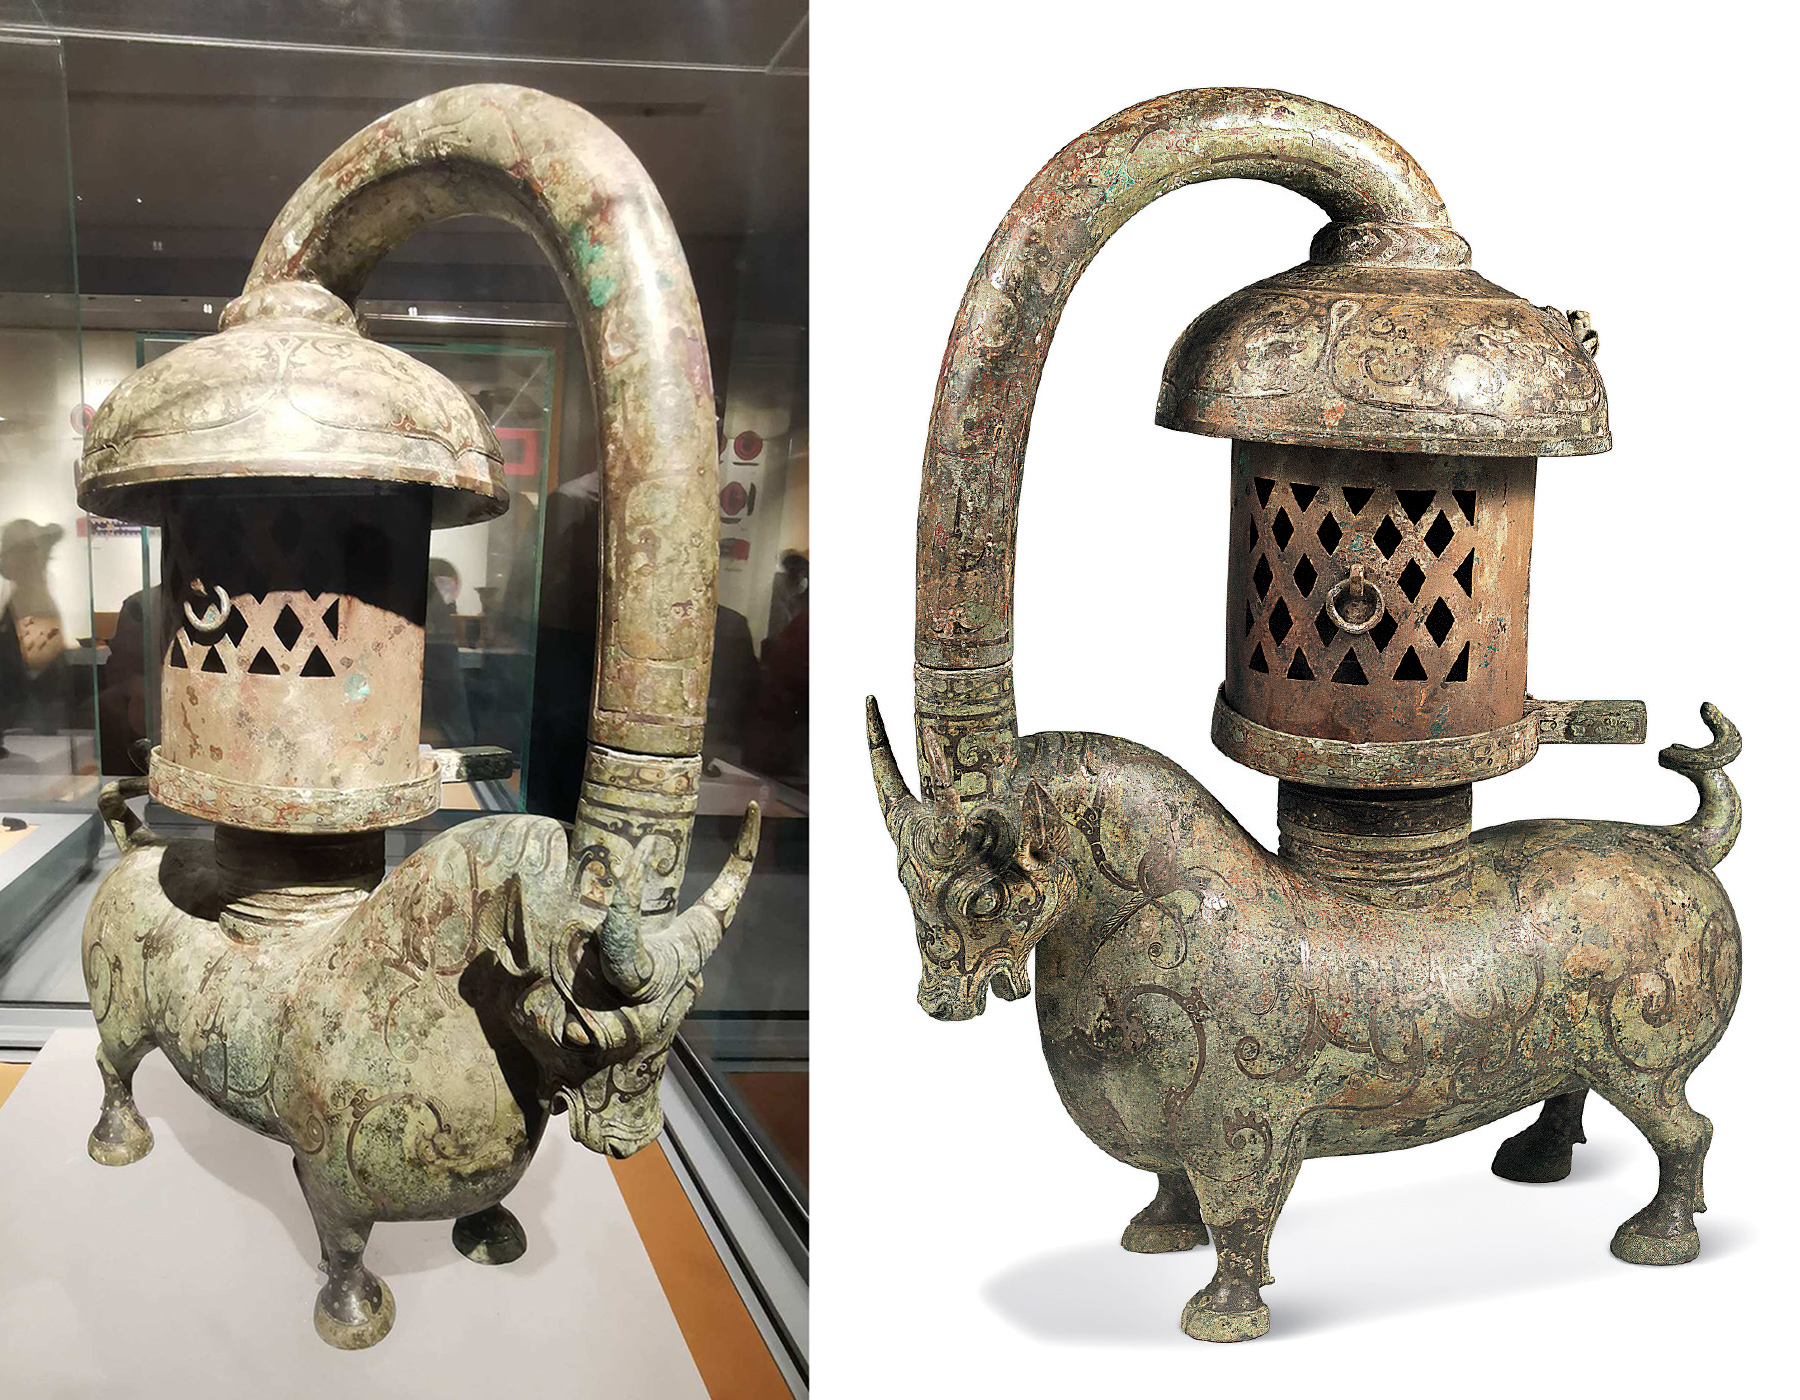 Bronze lamp shaped like an ox, with turnable shutter. From the tomb of prince Liu Jing. China, Eastern Han dynasty, 67 AD.jpg